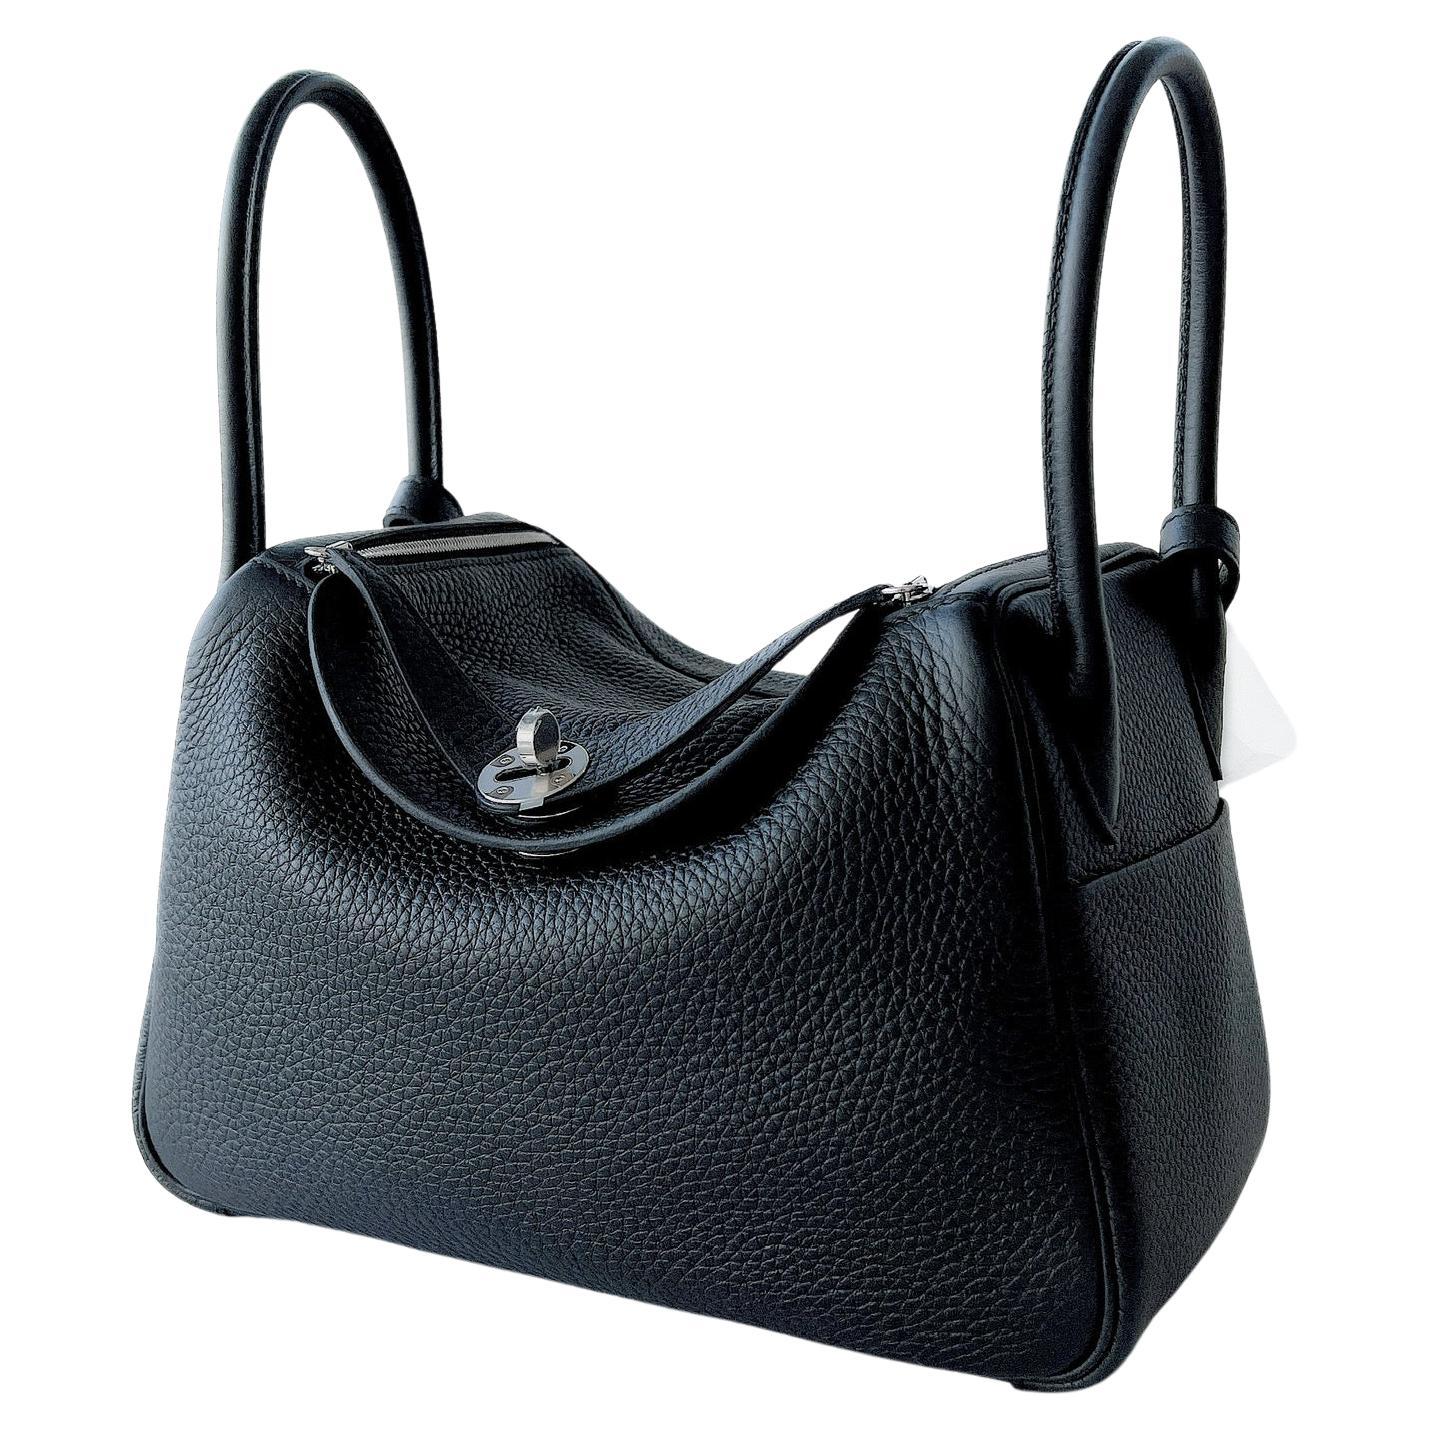 Hermes Lindy 26 In Black With Palladium Hardware